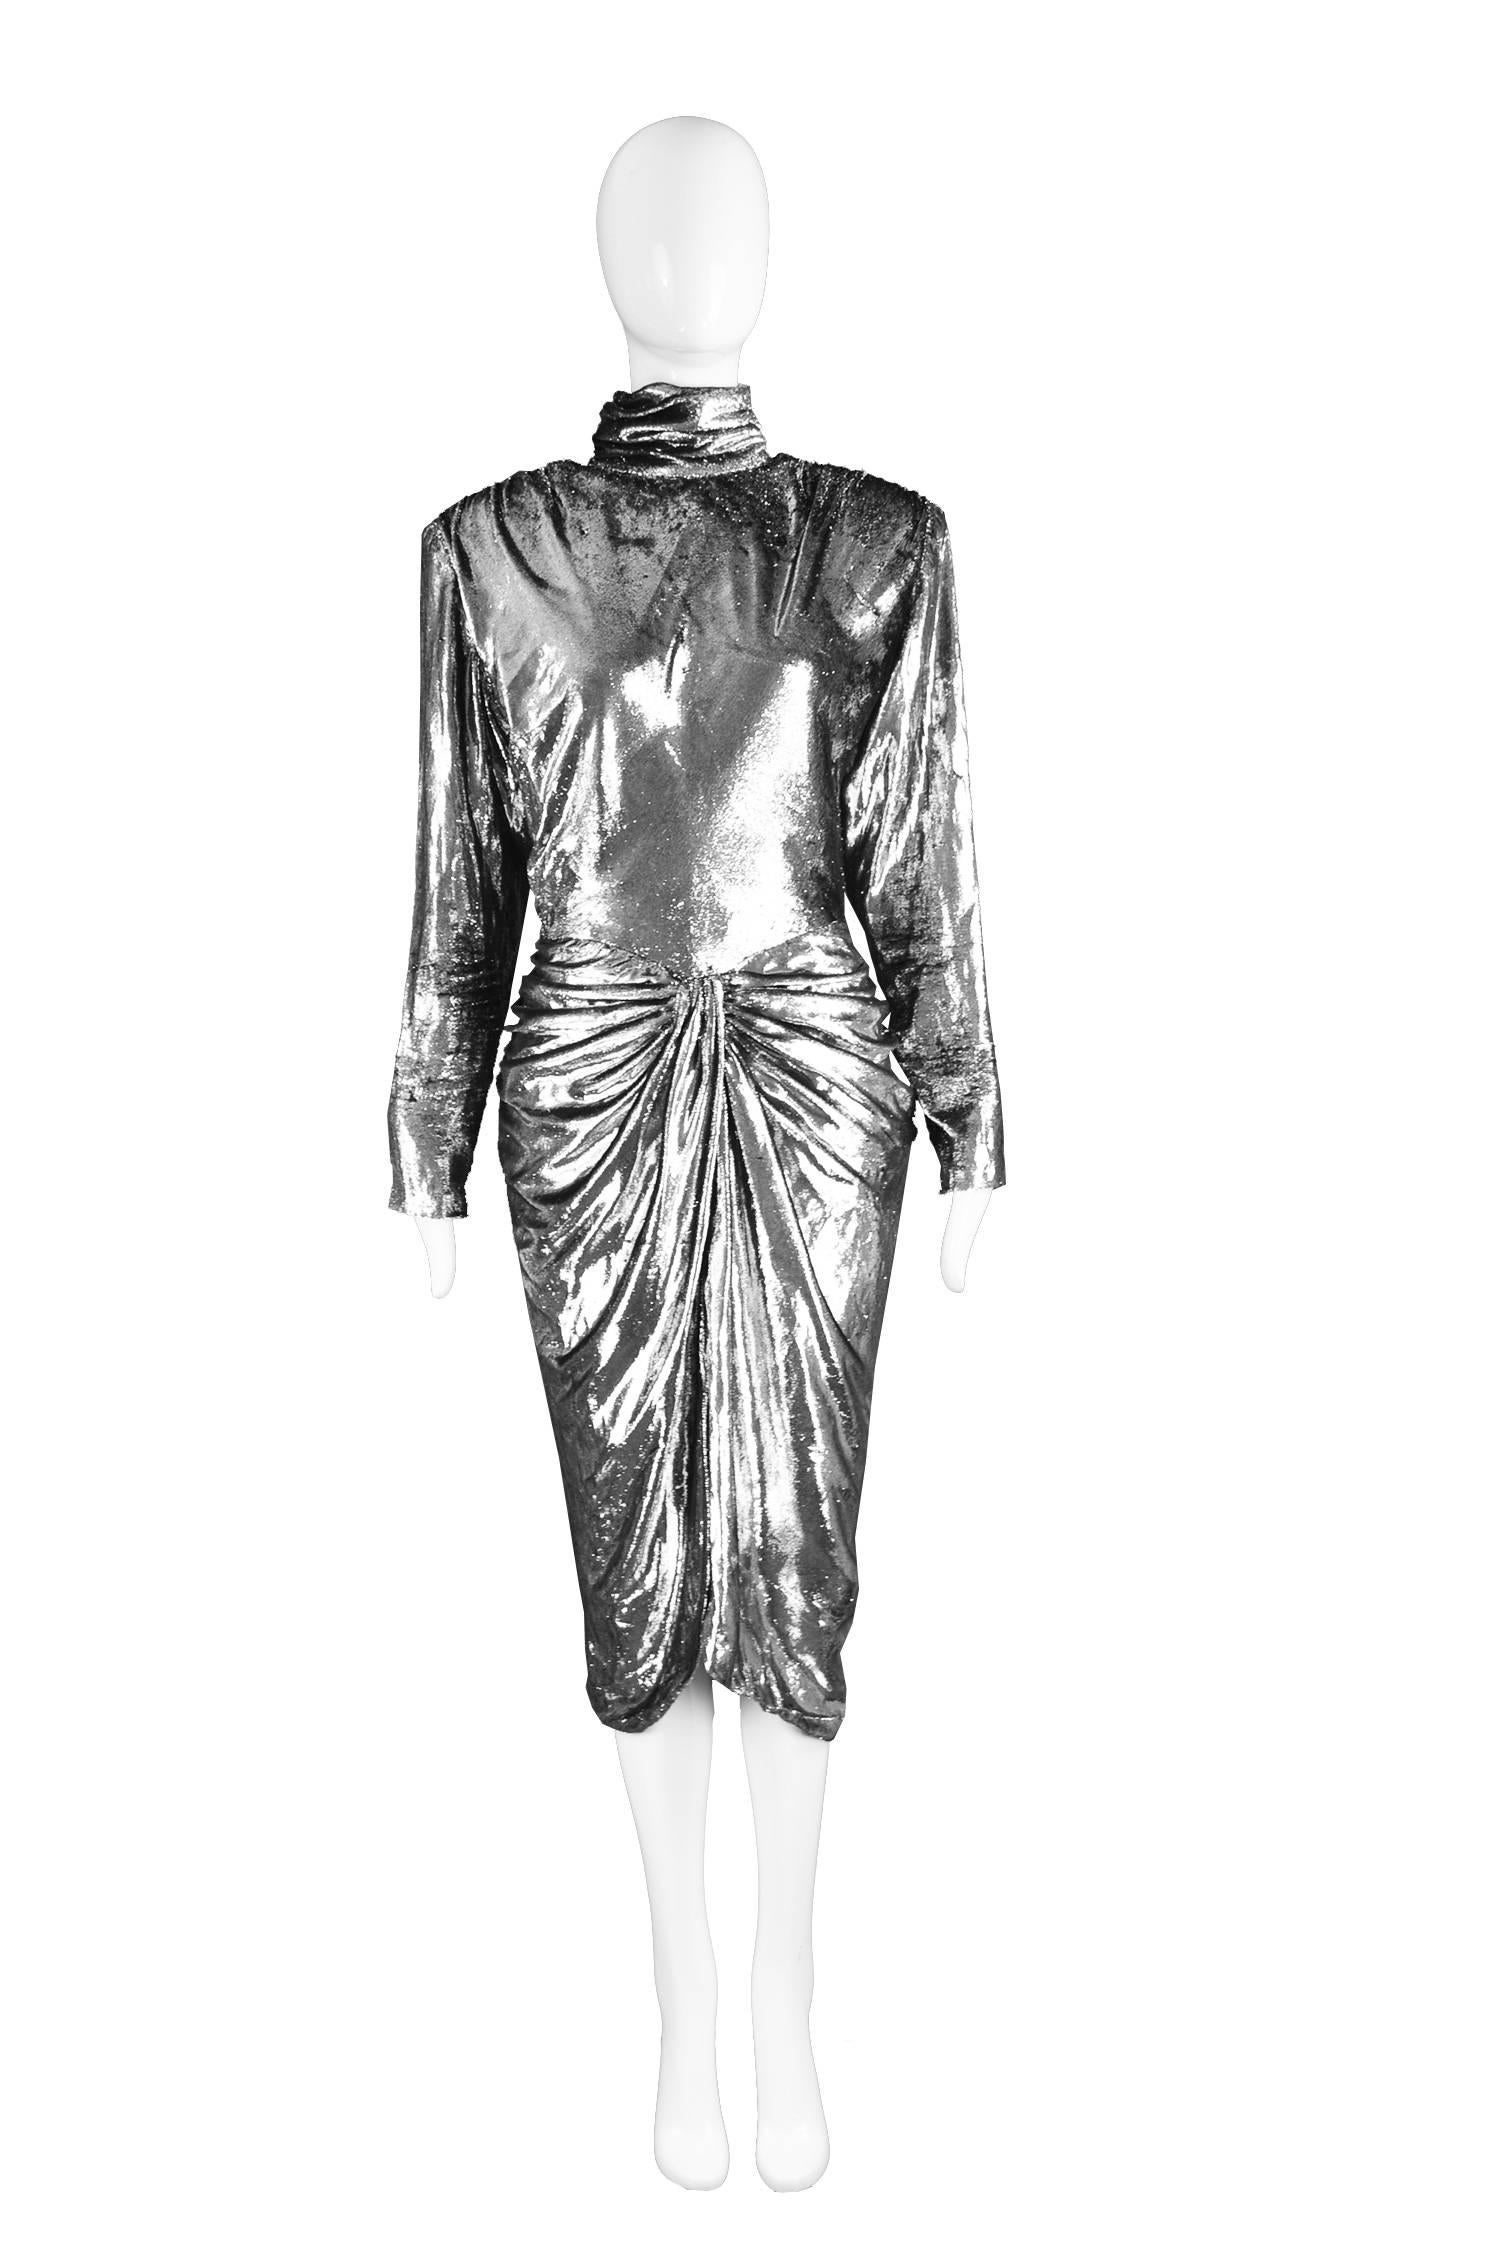 Vicky Tiel Silver Lame Velvet Vintage Draped Evening Dress, 1980s

Please Click +CONTINUE READING to see measurements, description and condition.

Estimated Size: UK 12/ US 8/ EU 40. Please check measurements
Bust - up to 40” / 101cm (has a loose,